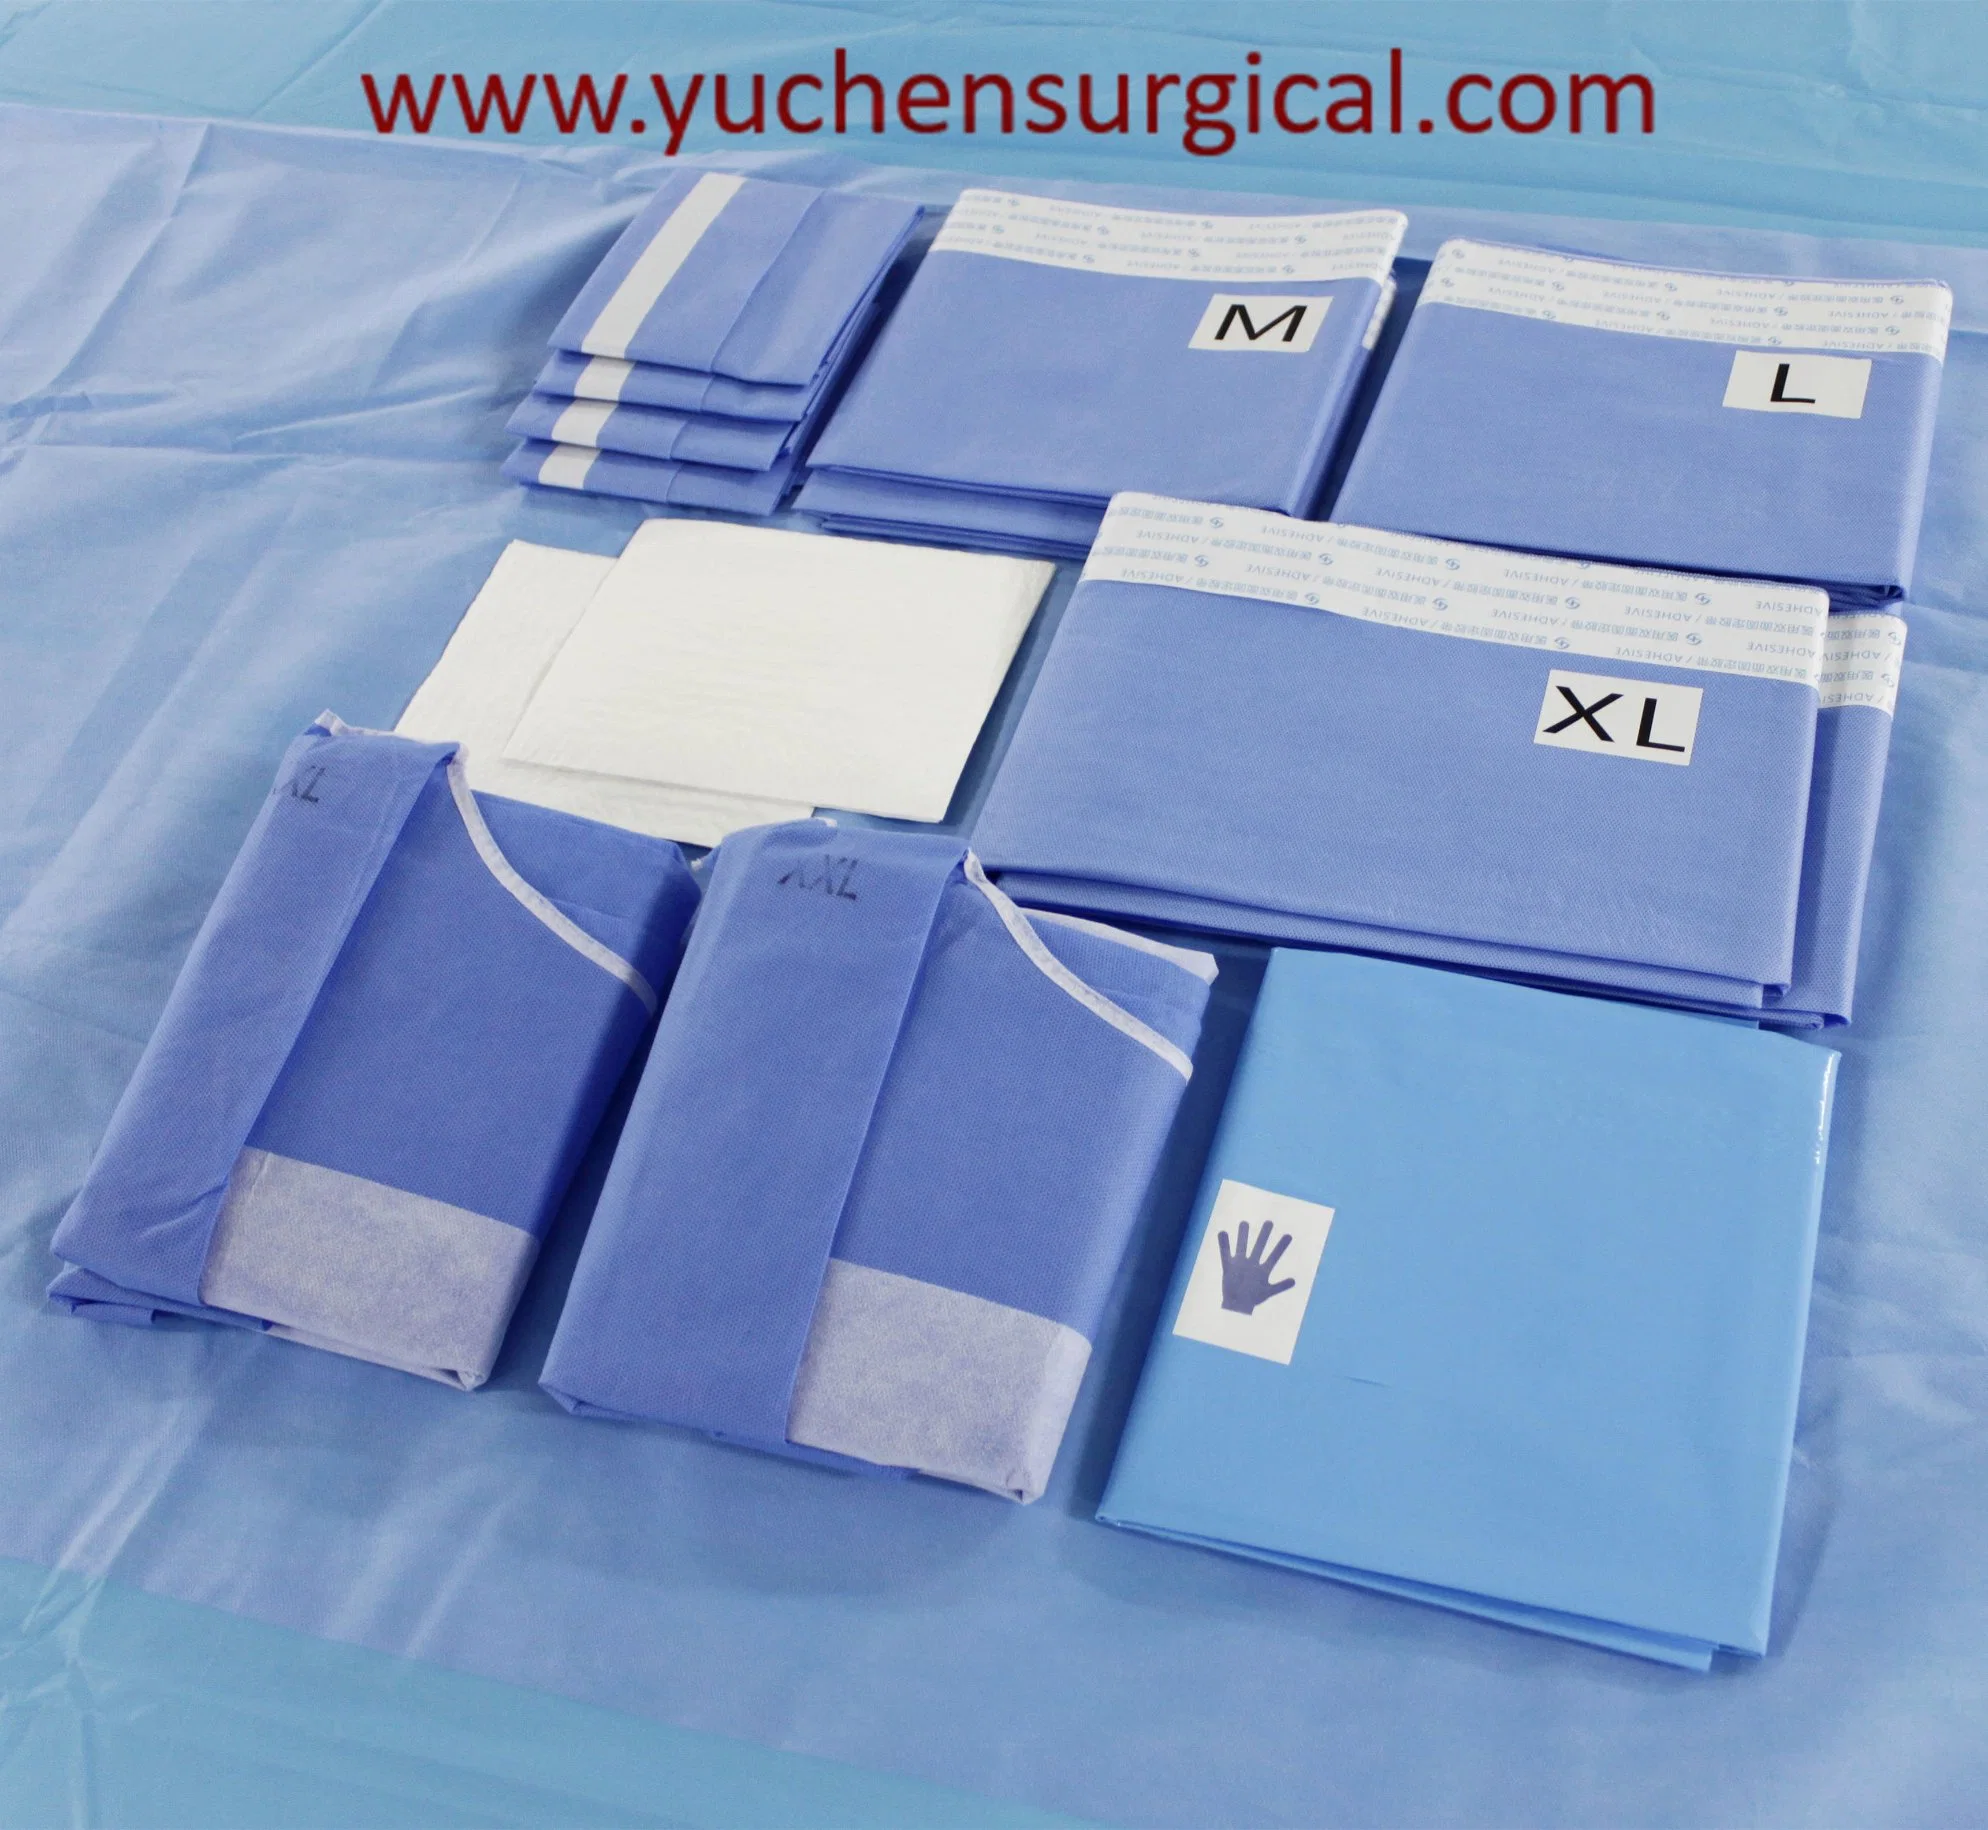 Disposable Sterile Surgical Universal Kits Drapes Pack for Hospital